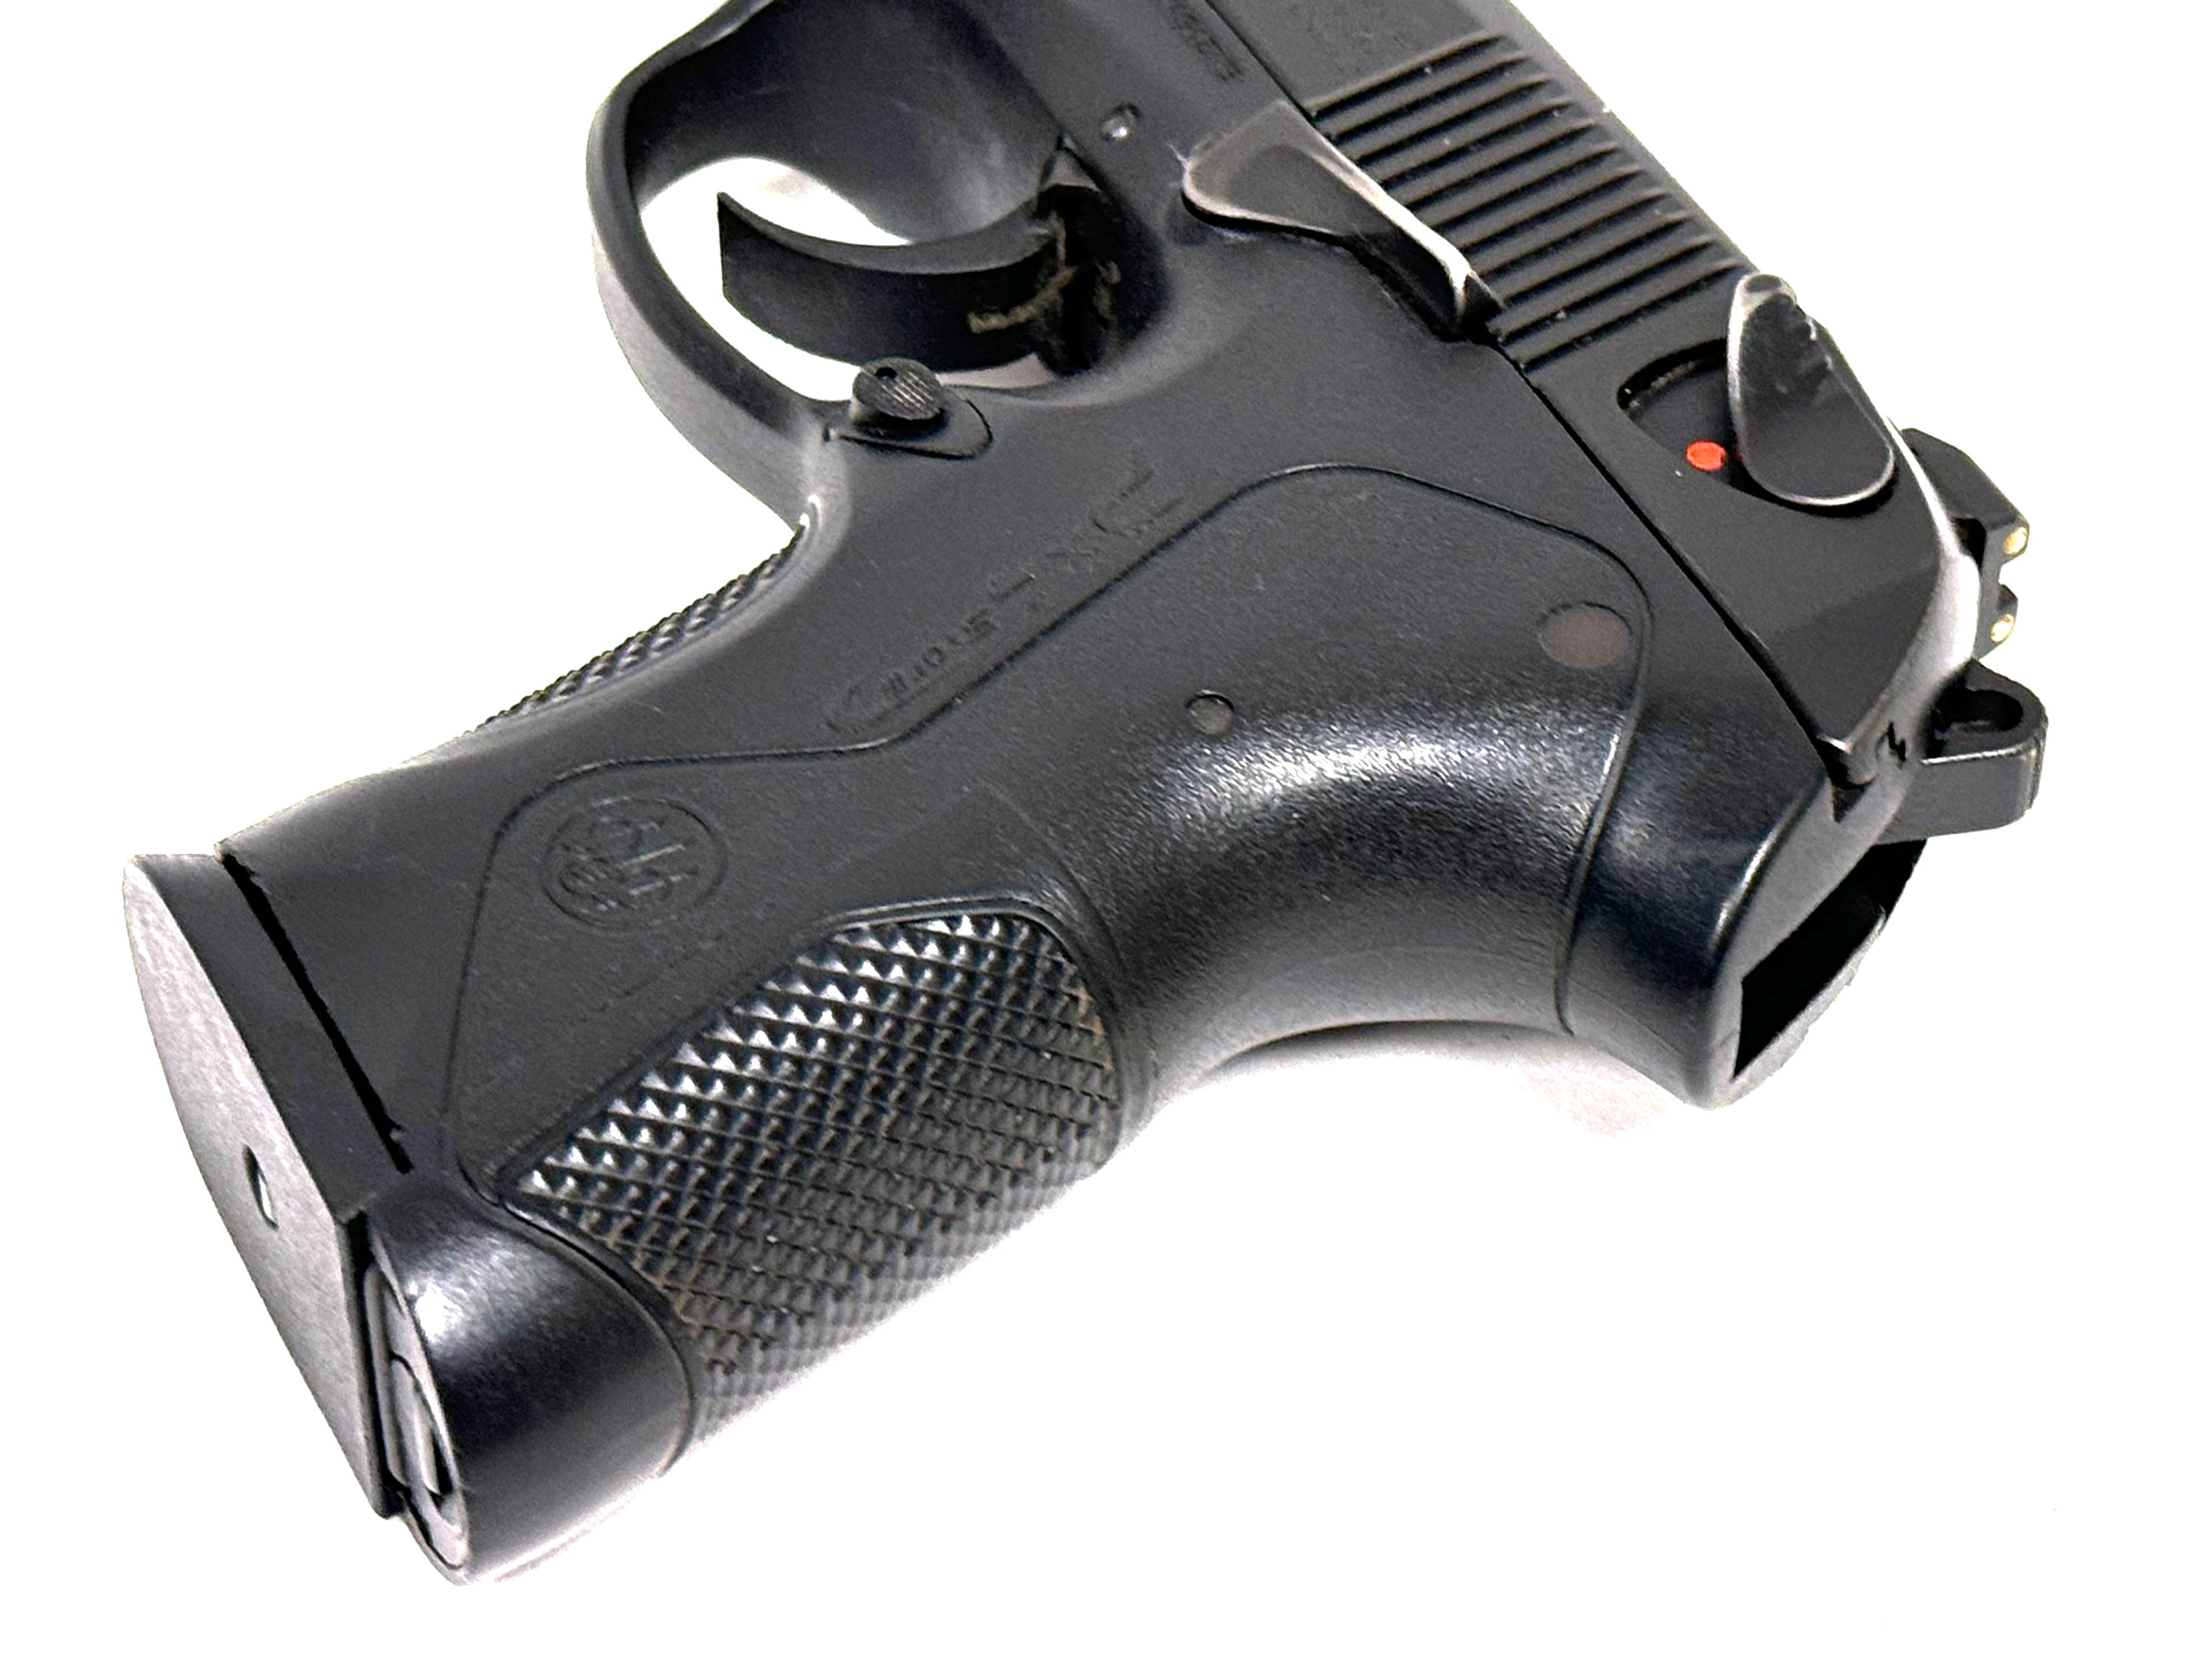 Beretta PX4 Storm 9mm Semi-Automatic Pistol with Holster and (2) Magazines